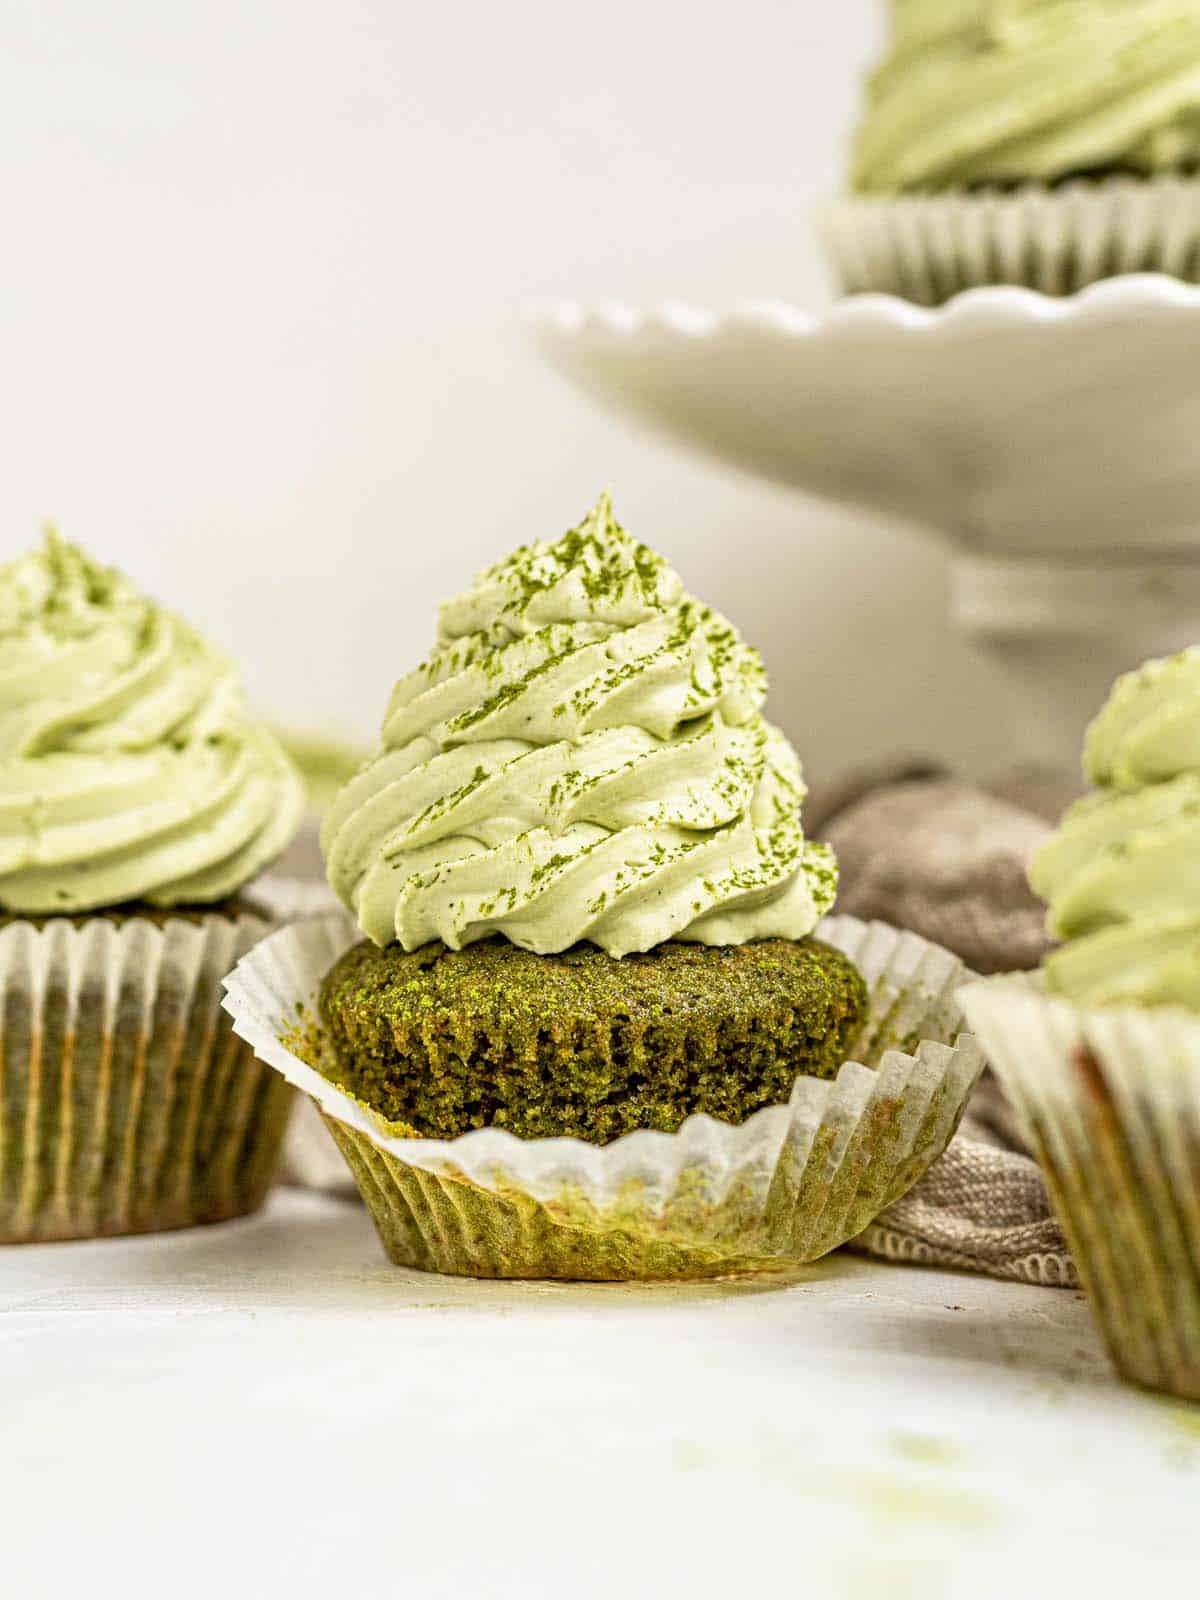 Matcha green tea cupcakes with whipped white chocolate ganache frosting